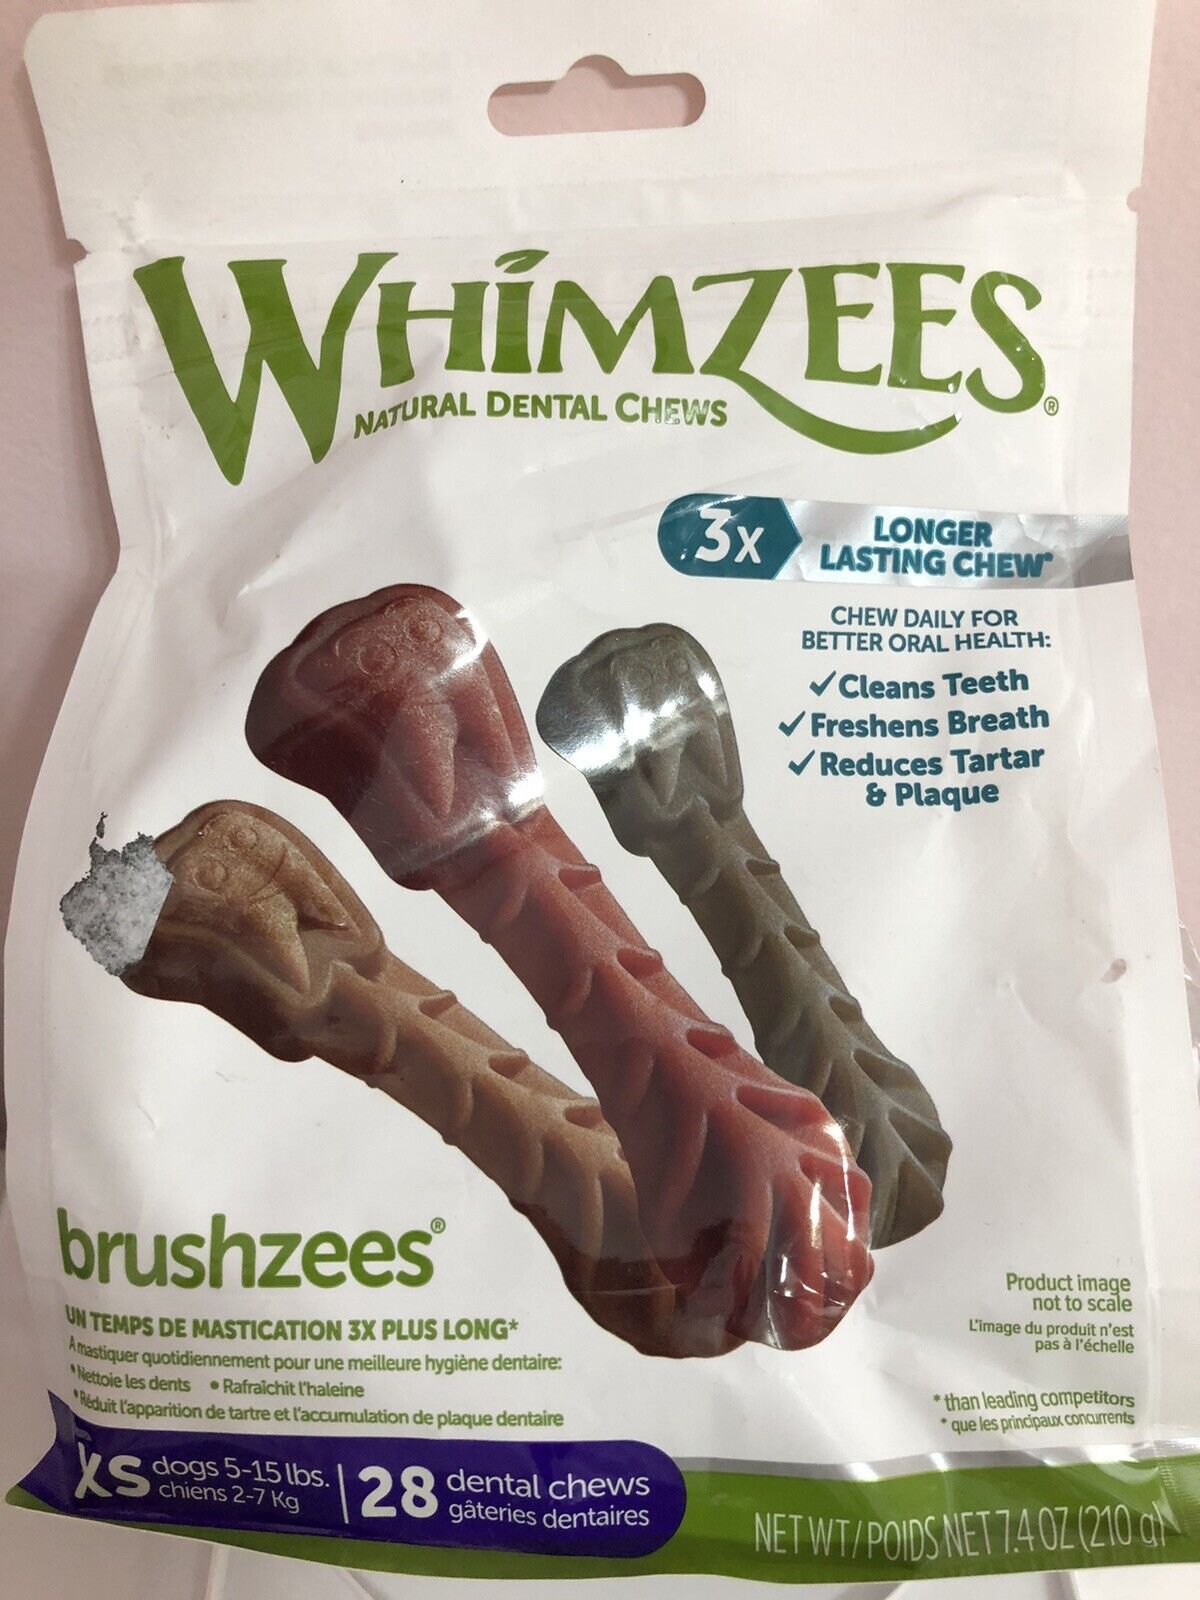 WHIMZEES Natural Dental Chews XS Dog 5-15 Exp 2024 lb. Max 53% Attention brand OFF 02